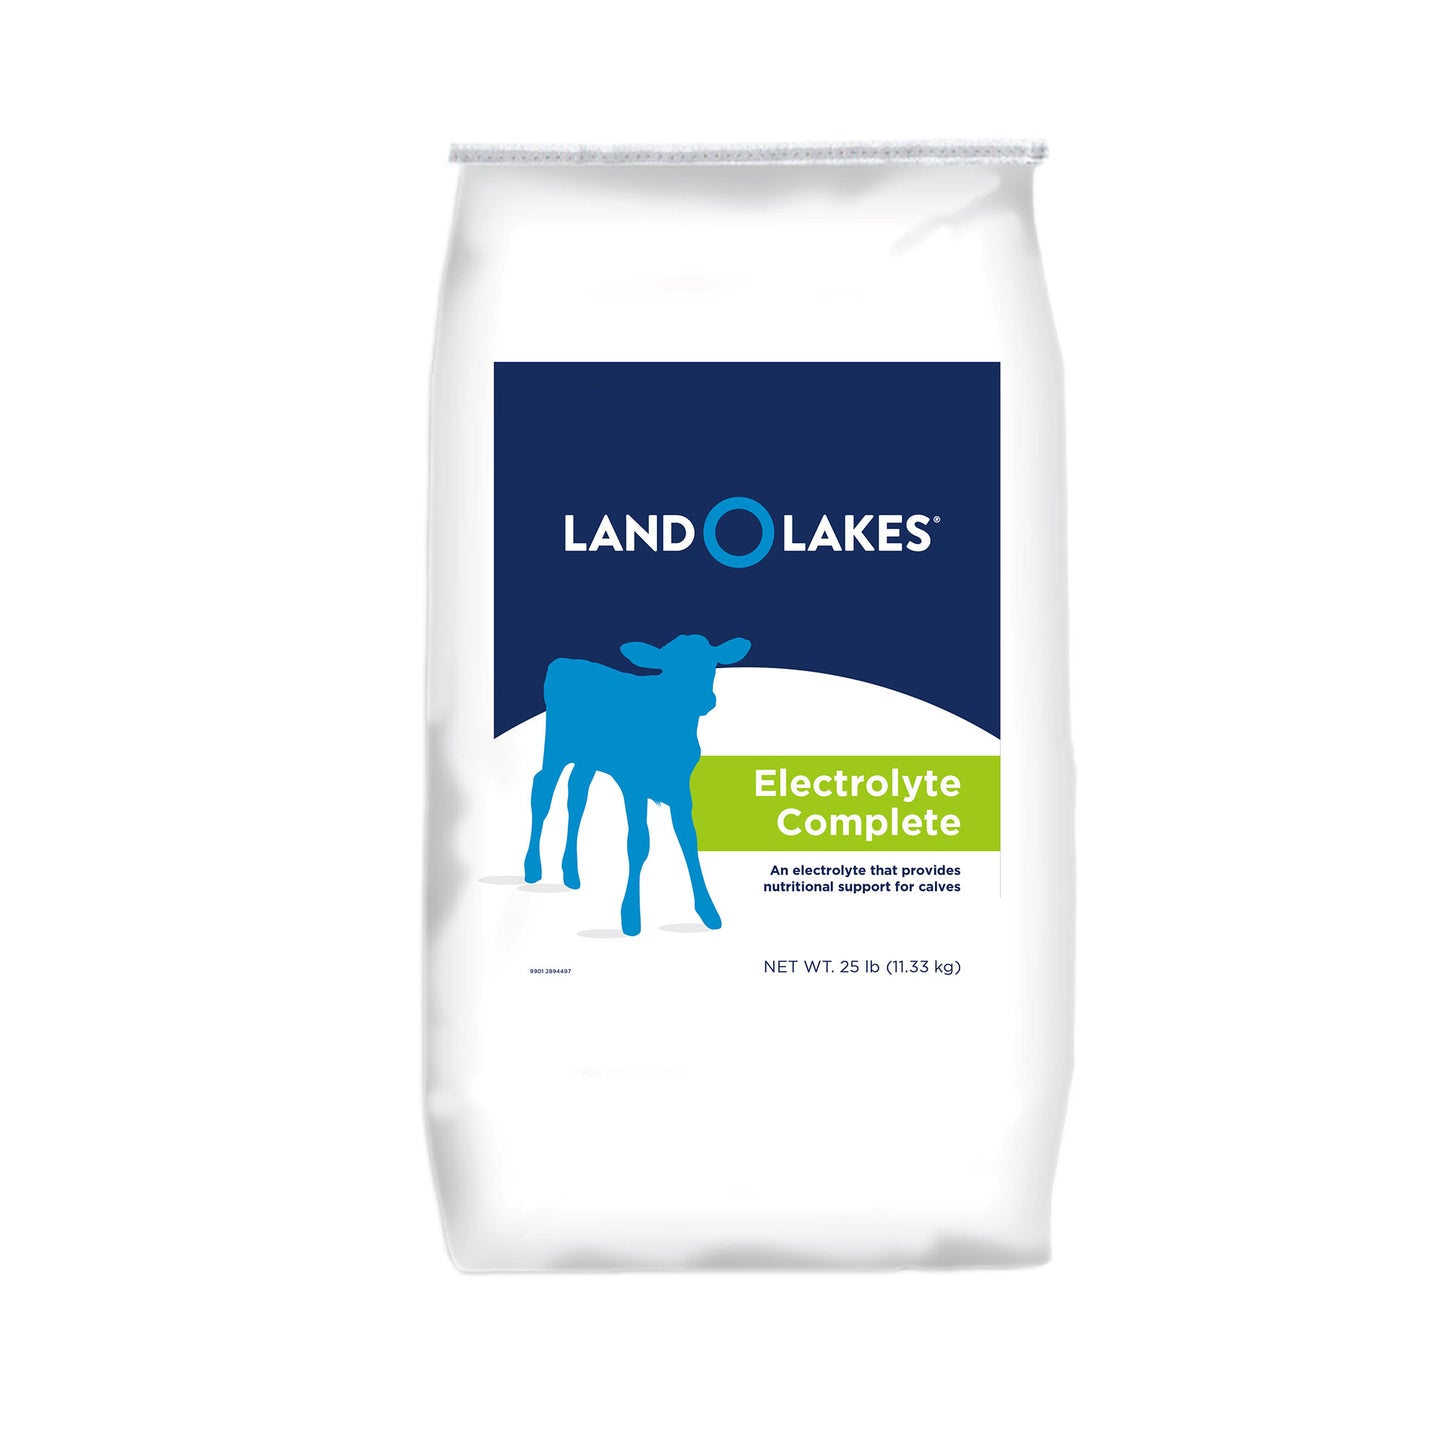 LAND O LAKES Electrolyte Complete supplement 25 Pound bag